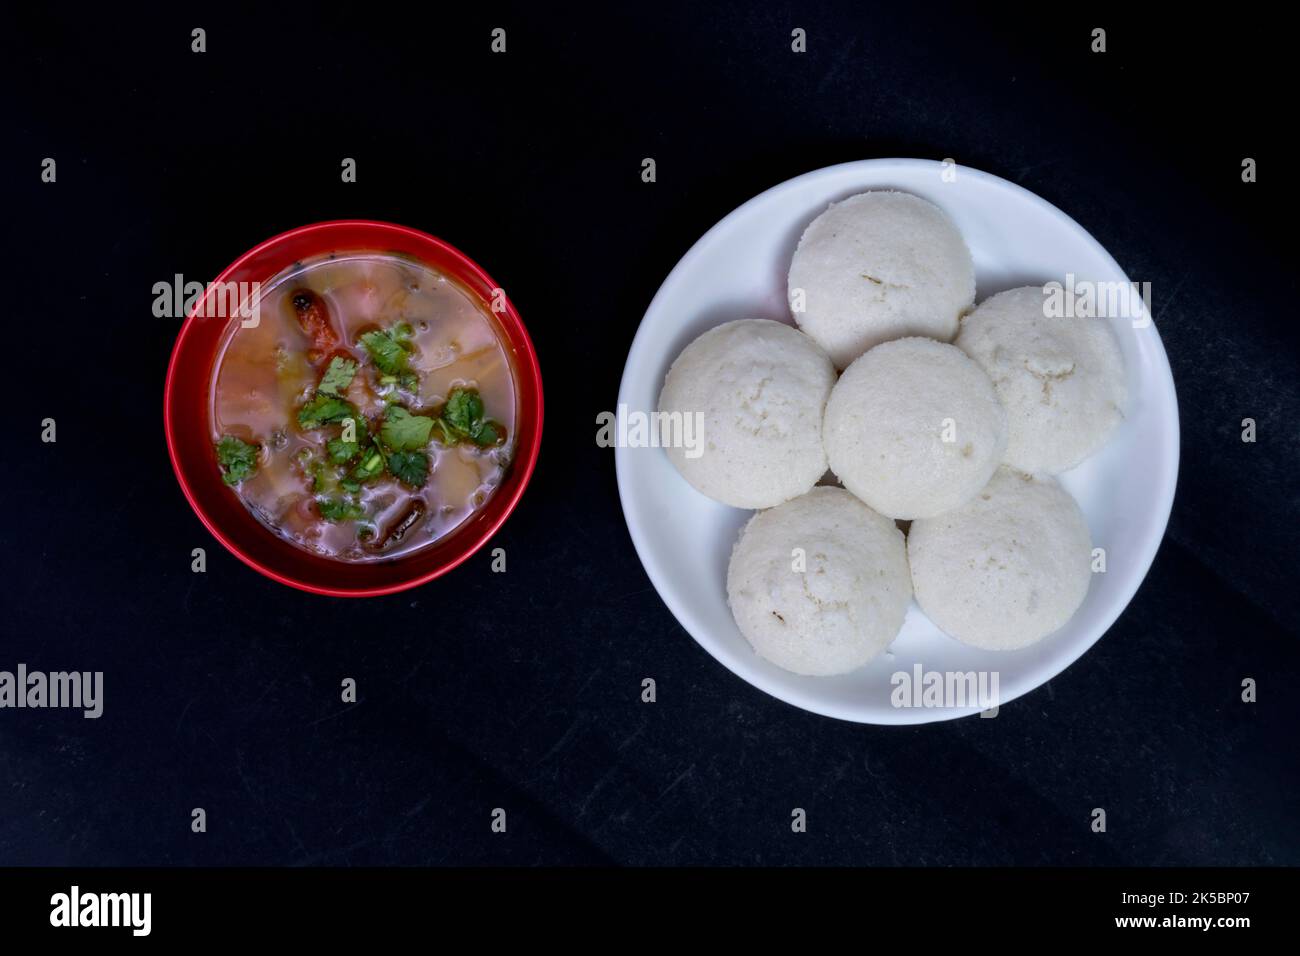 Idly In White Plate With Sambar In Red Bowl, Isolated On Black Background, Idly In White Plate, Sambar In Red Round Bowl, South Indian Breakfast Stock Photo